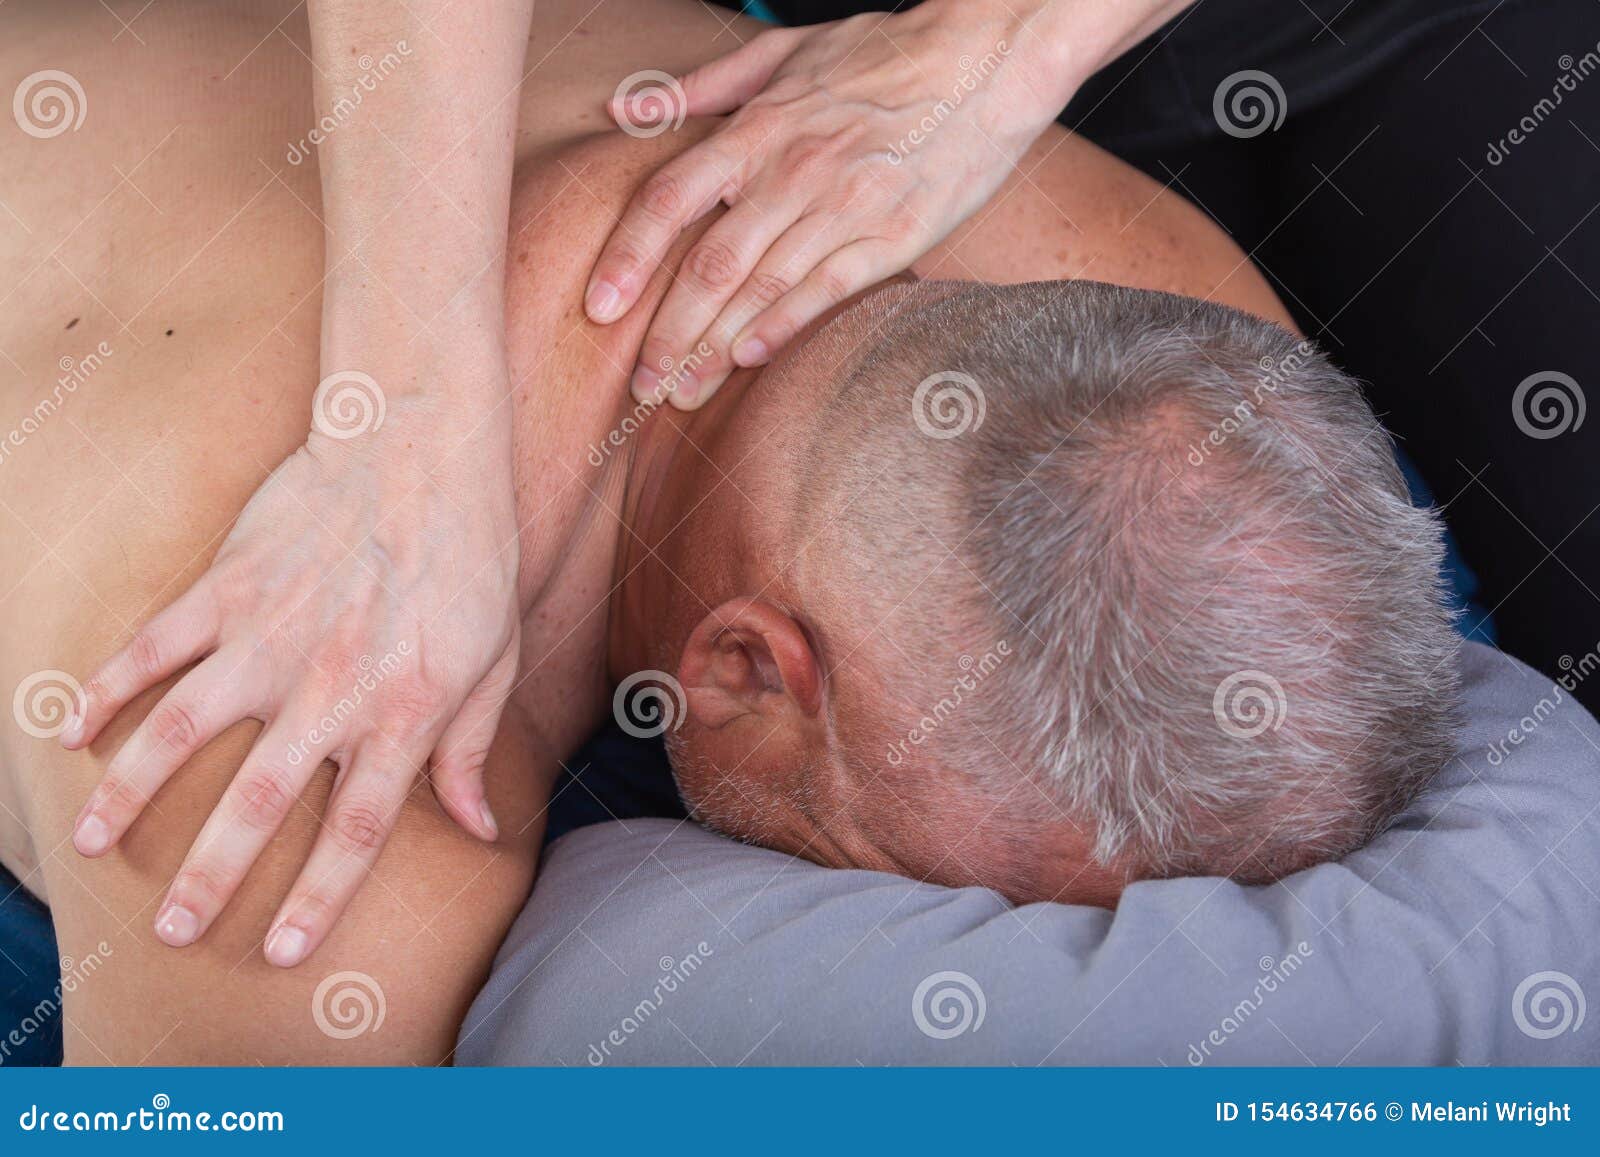 Pic Of Naked Massage